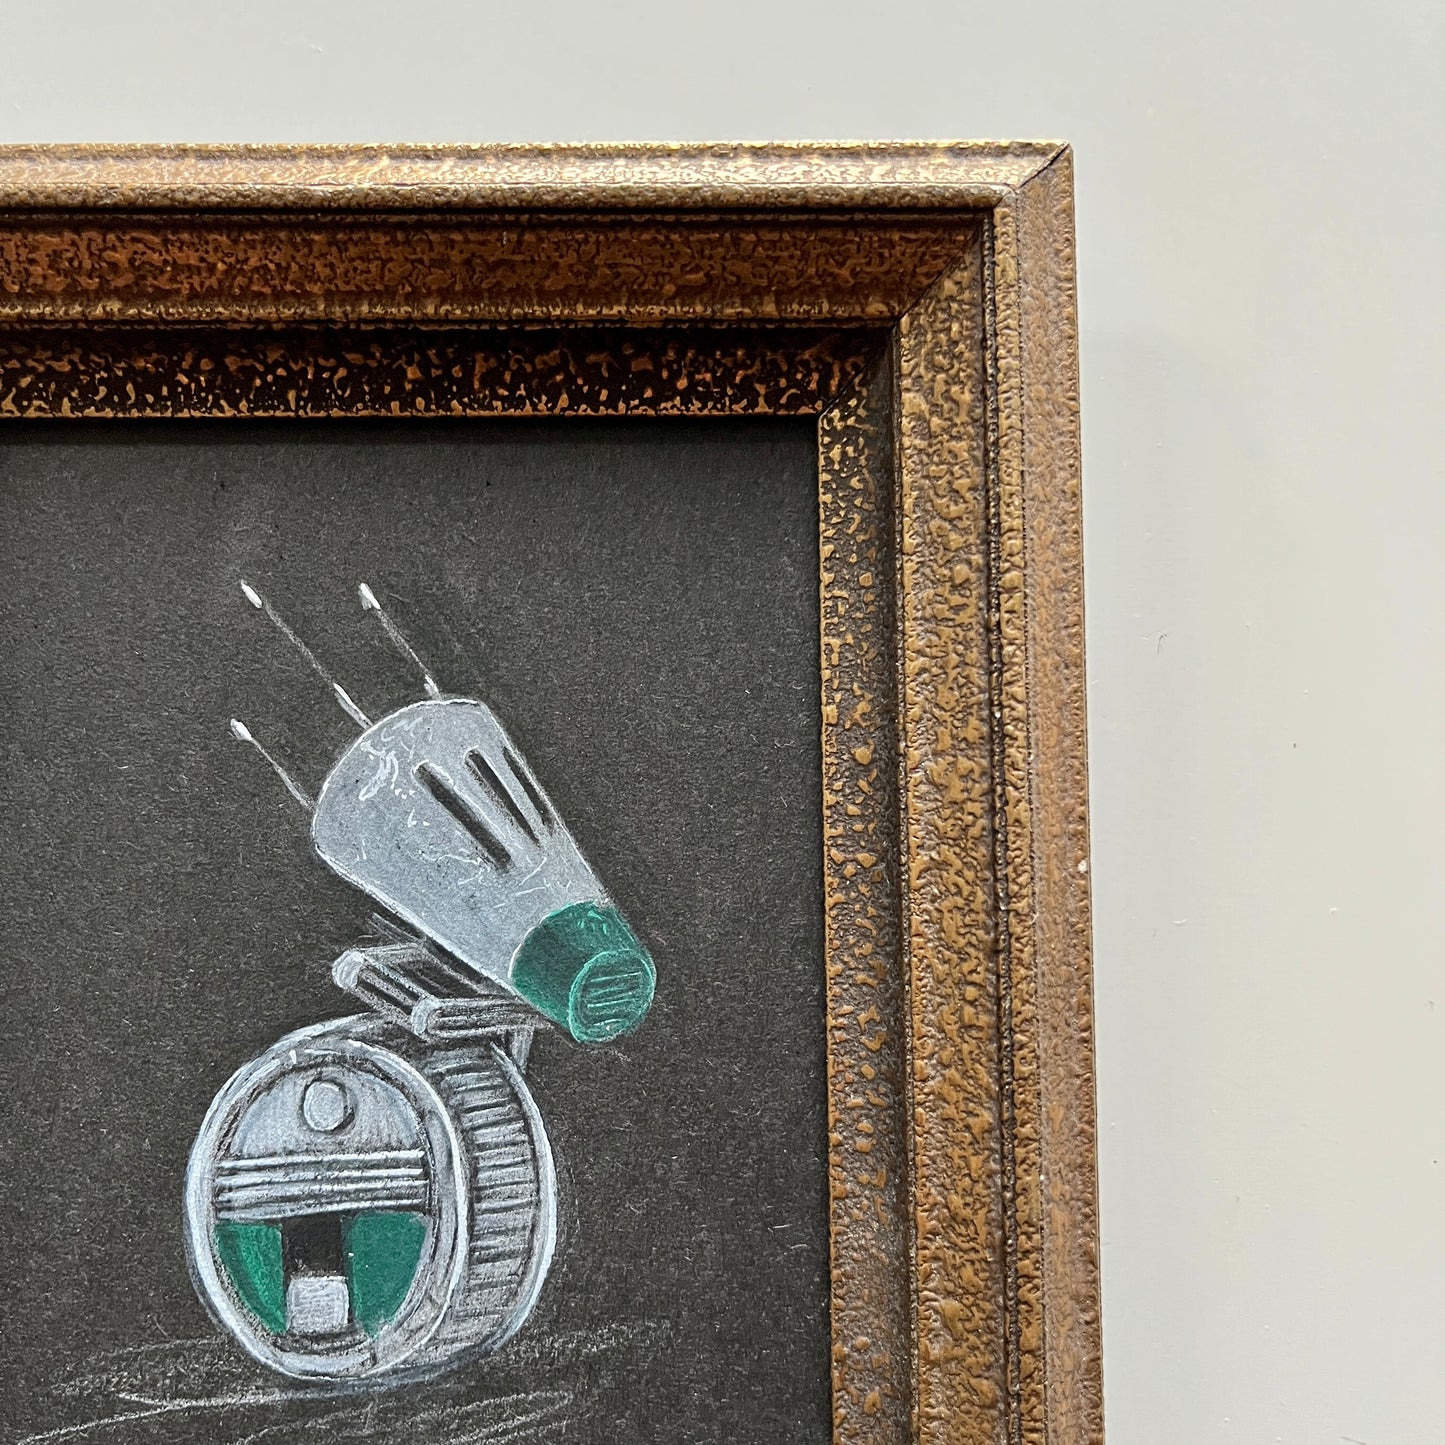 Portrait of a Droid : D-O,  pencil drawing on antique paper, in vintage frame